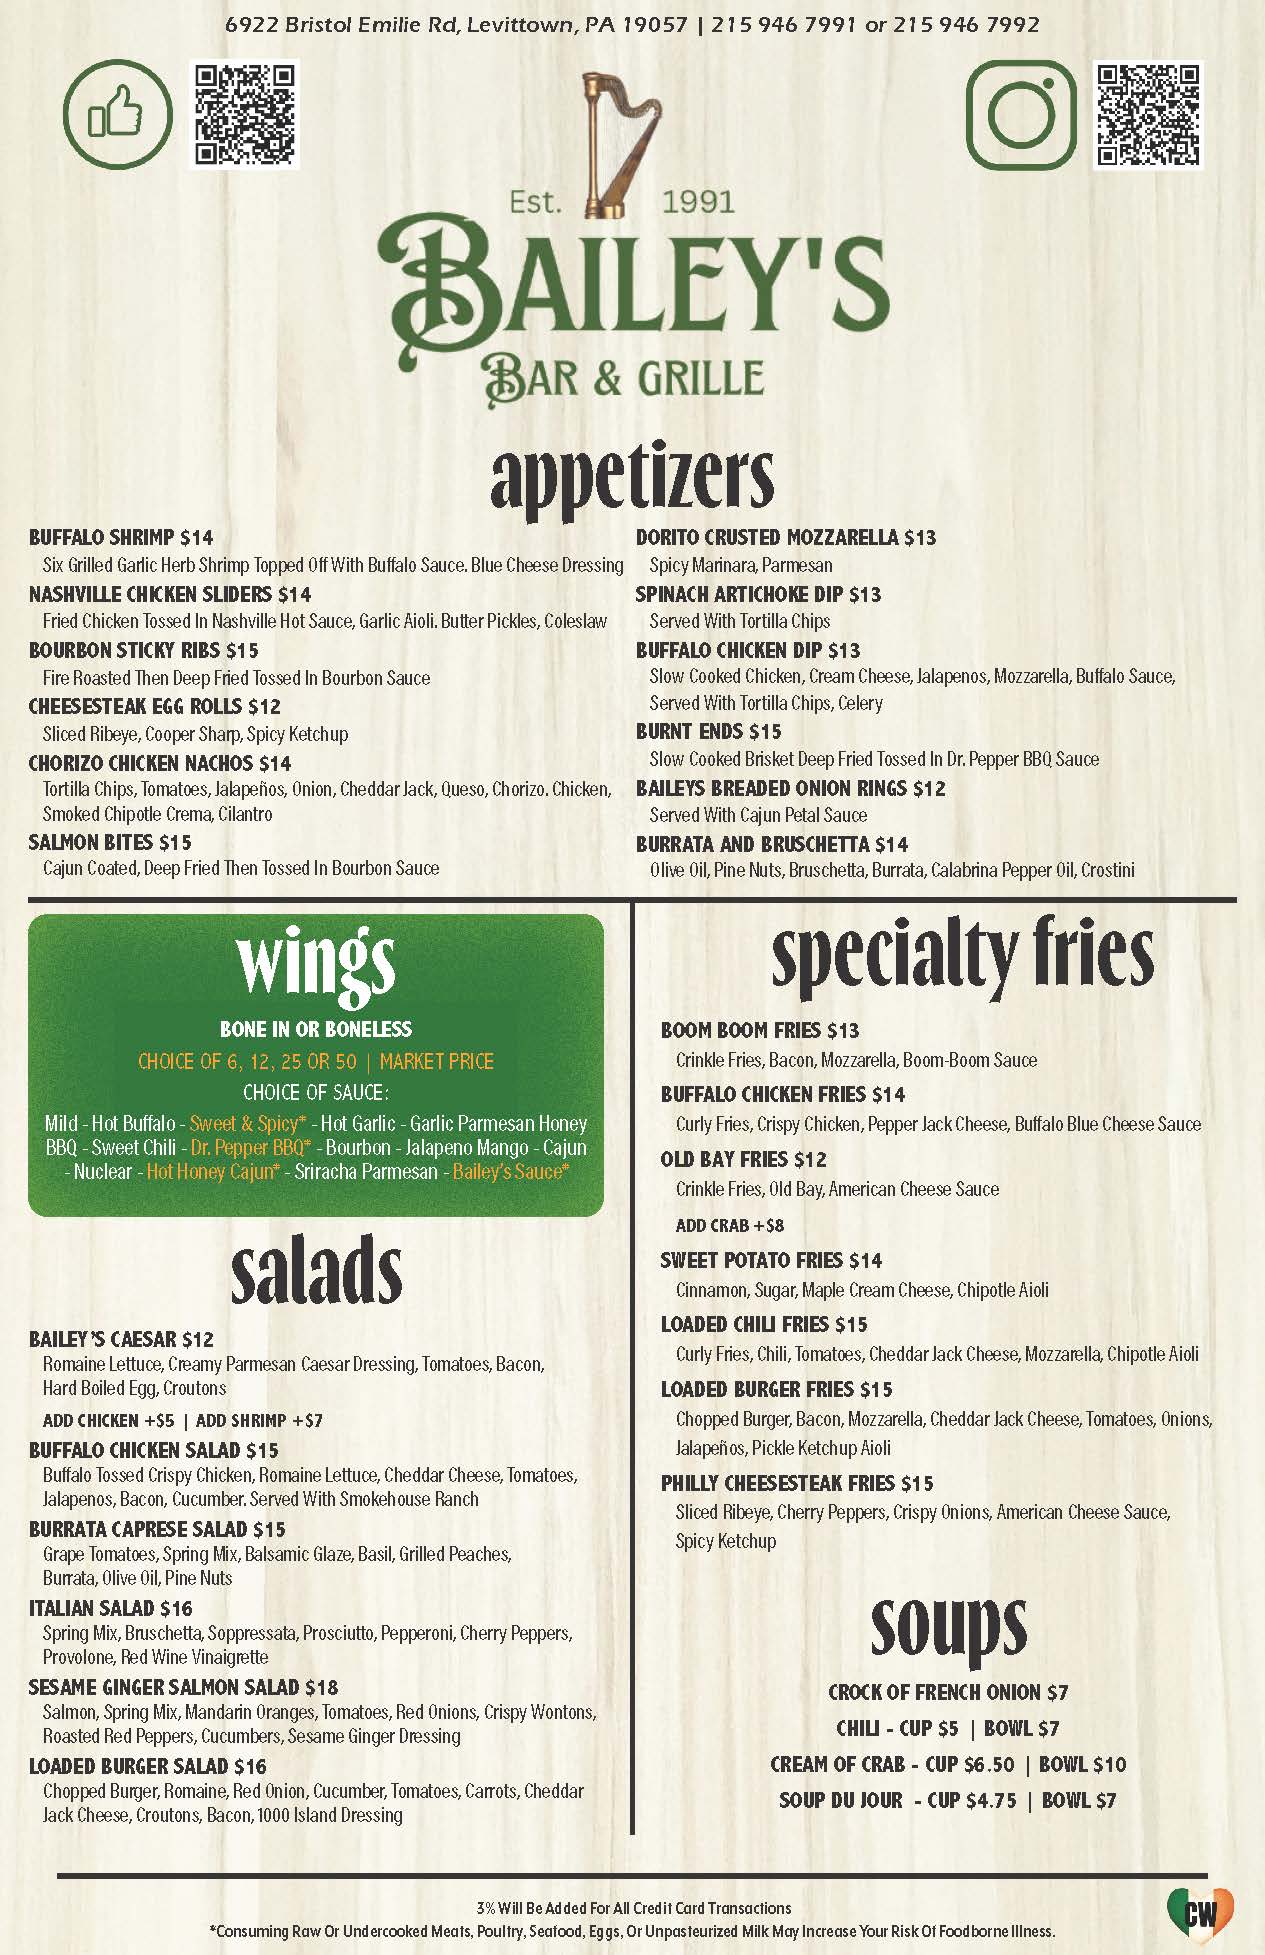 Menu from bailey's bar and grille featuring a variety of food items including appetizers, wings, salads, burgers, and qr code for contact information.